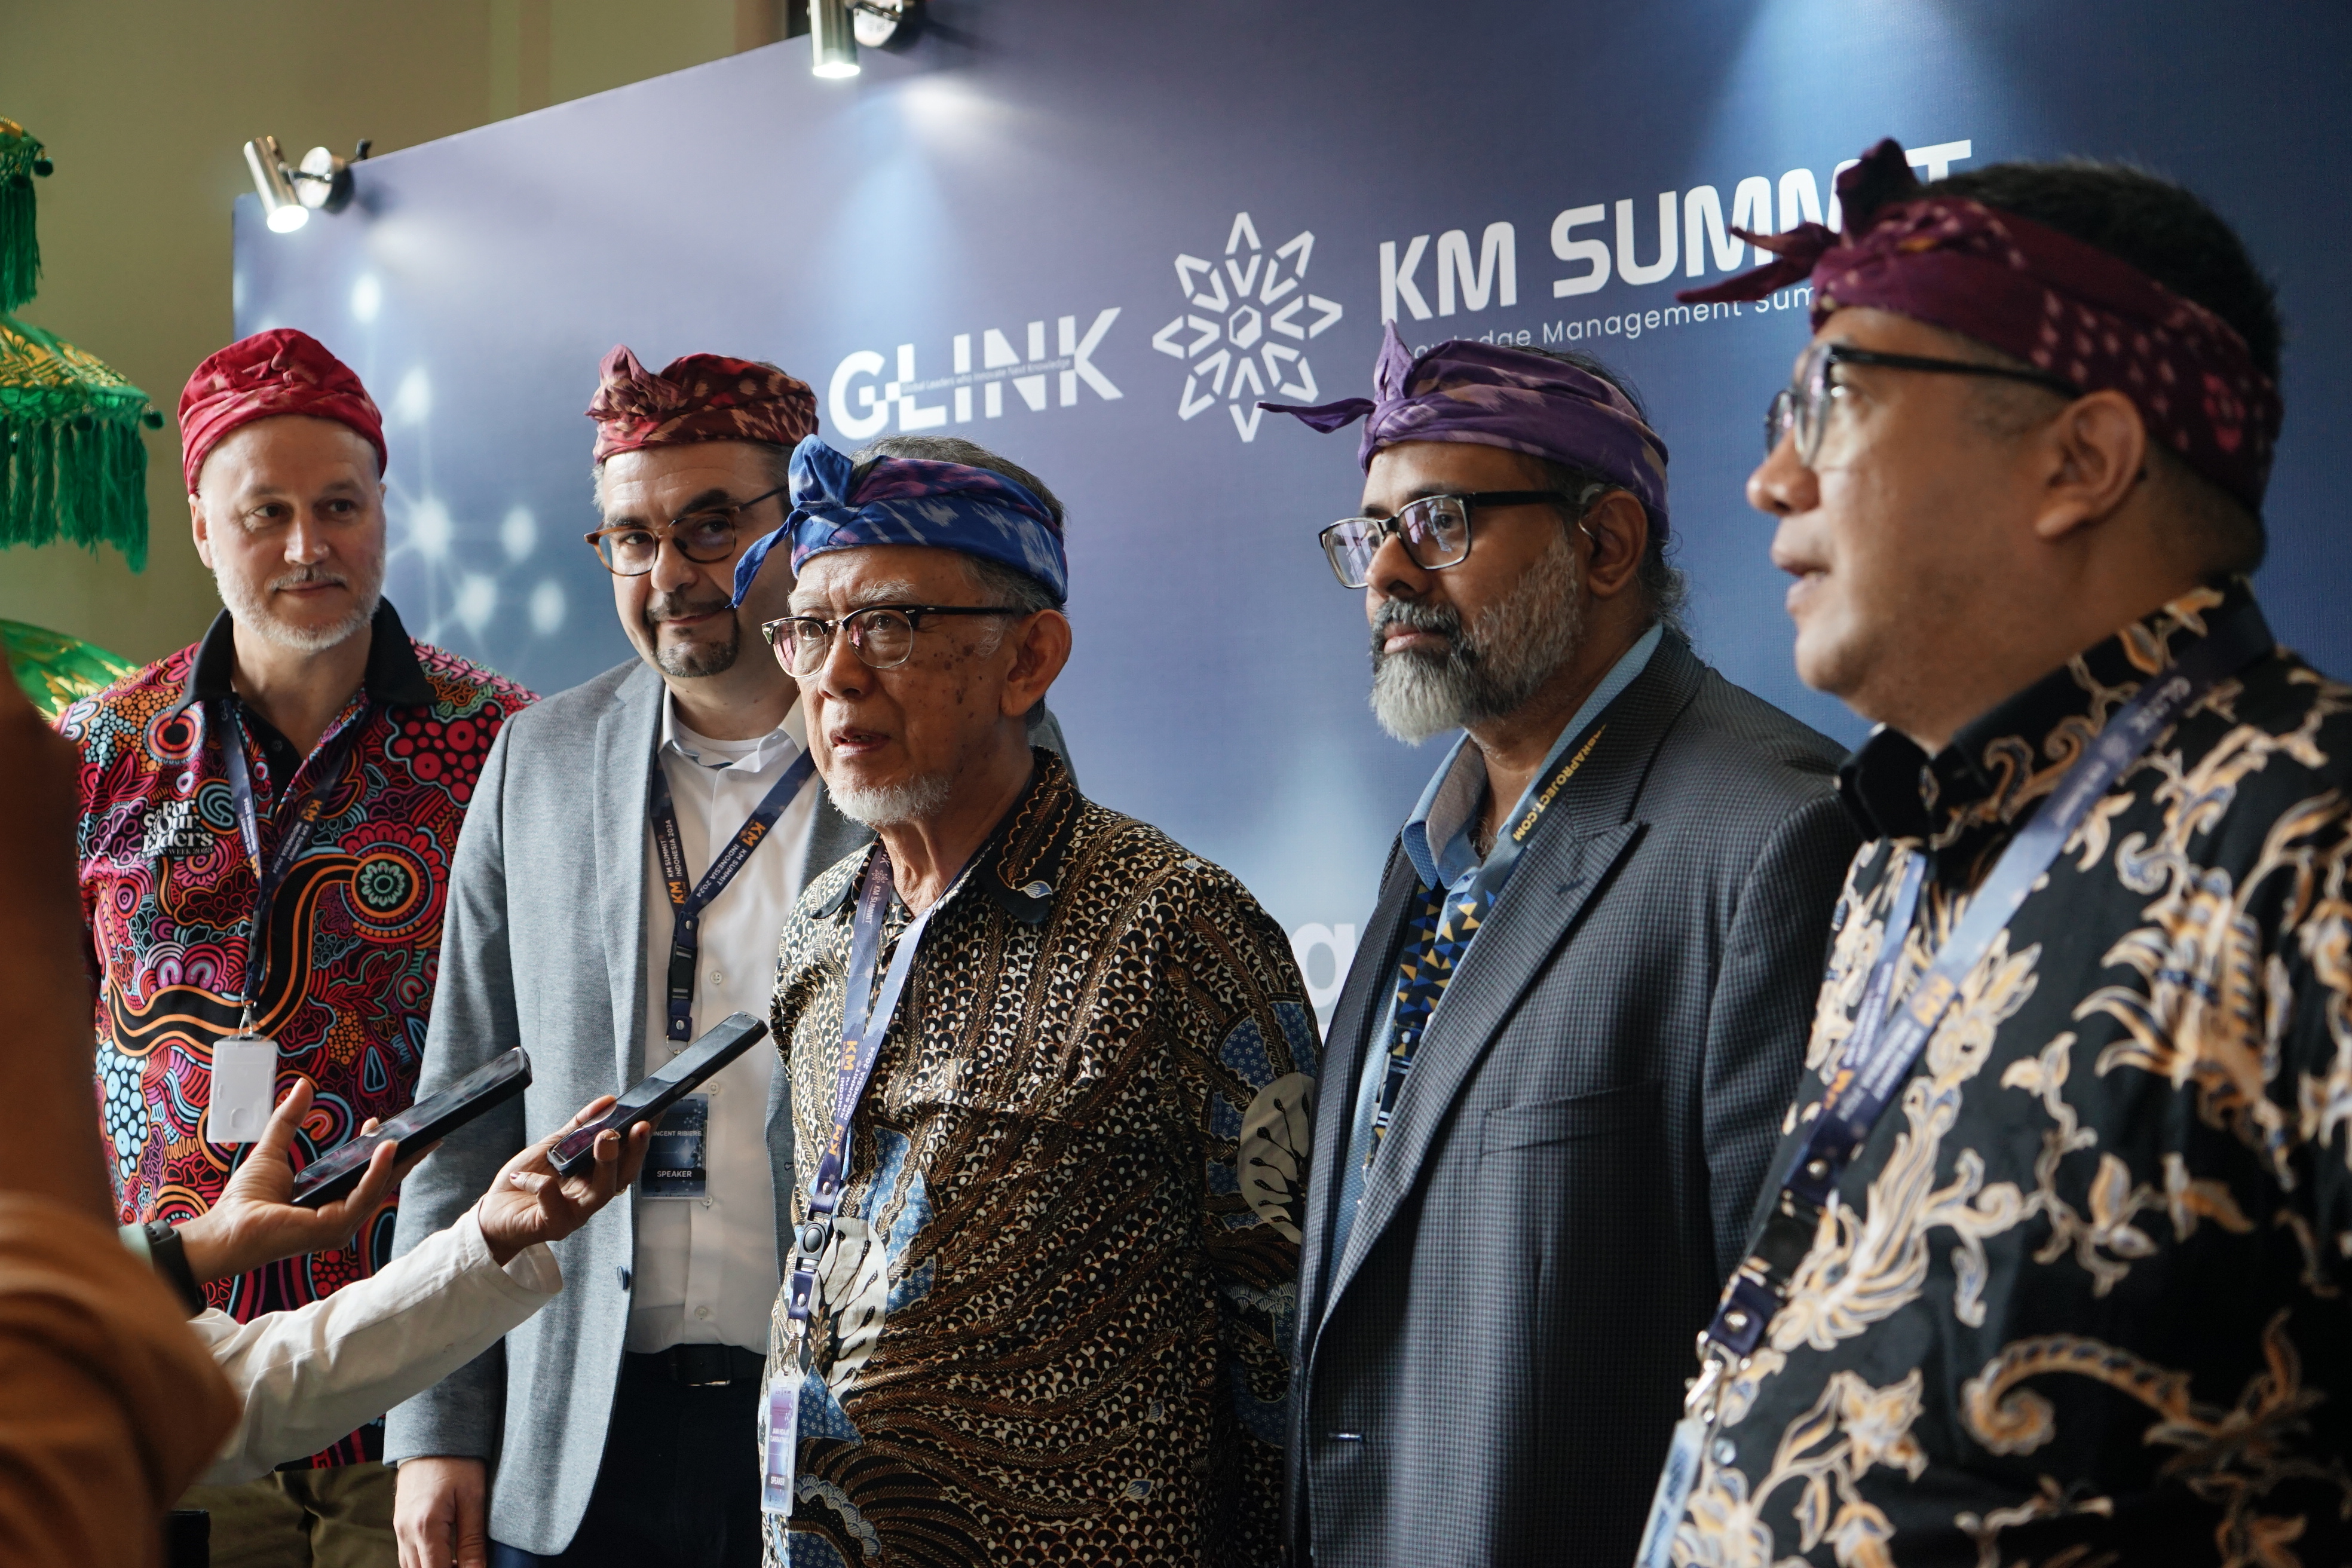 sbm-itb-professor-promotes-end-to-end-knowledge-management-implementation-at-glink-knowledge-management-summit-2024